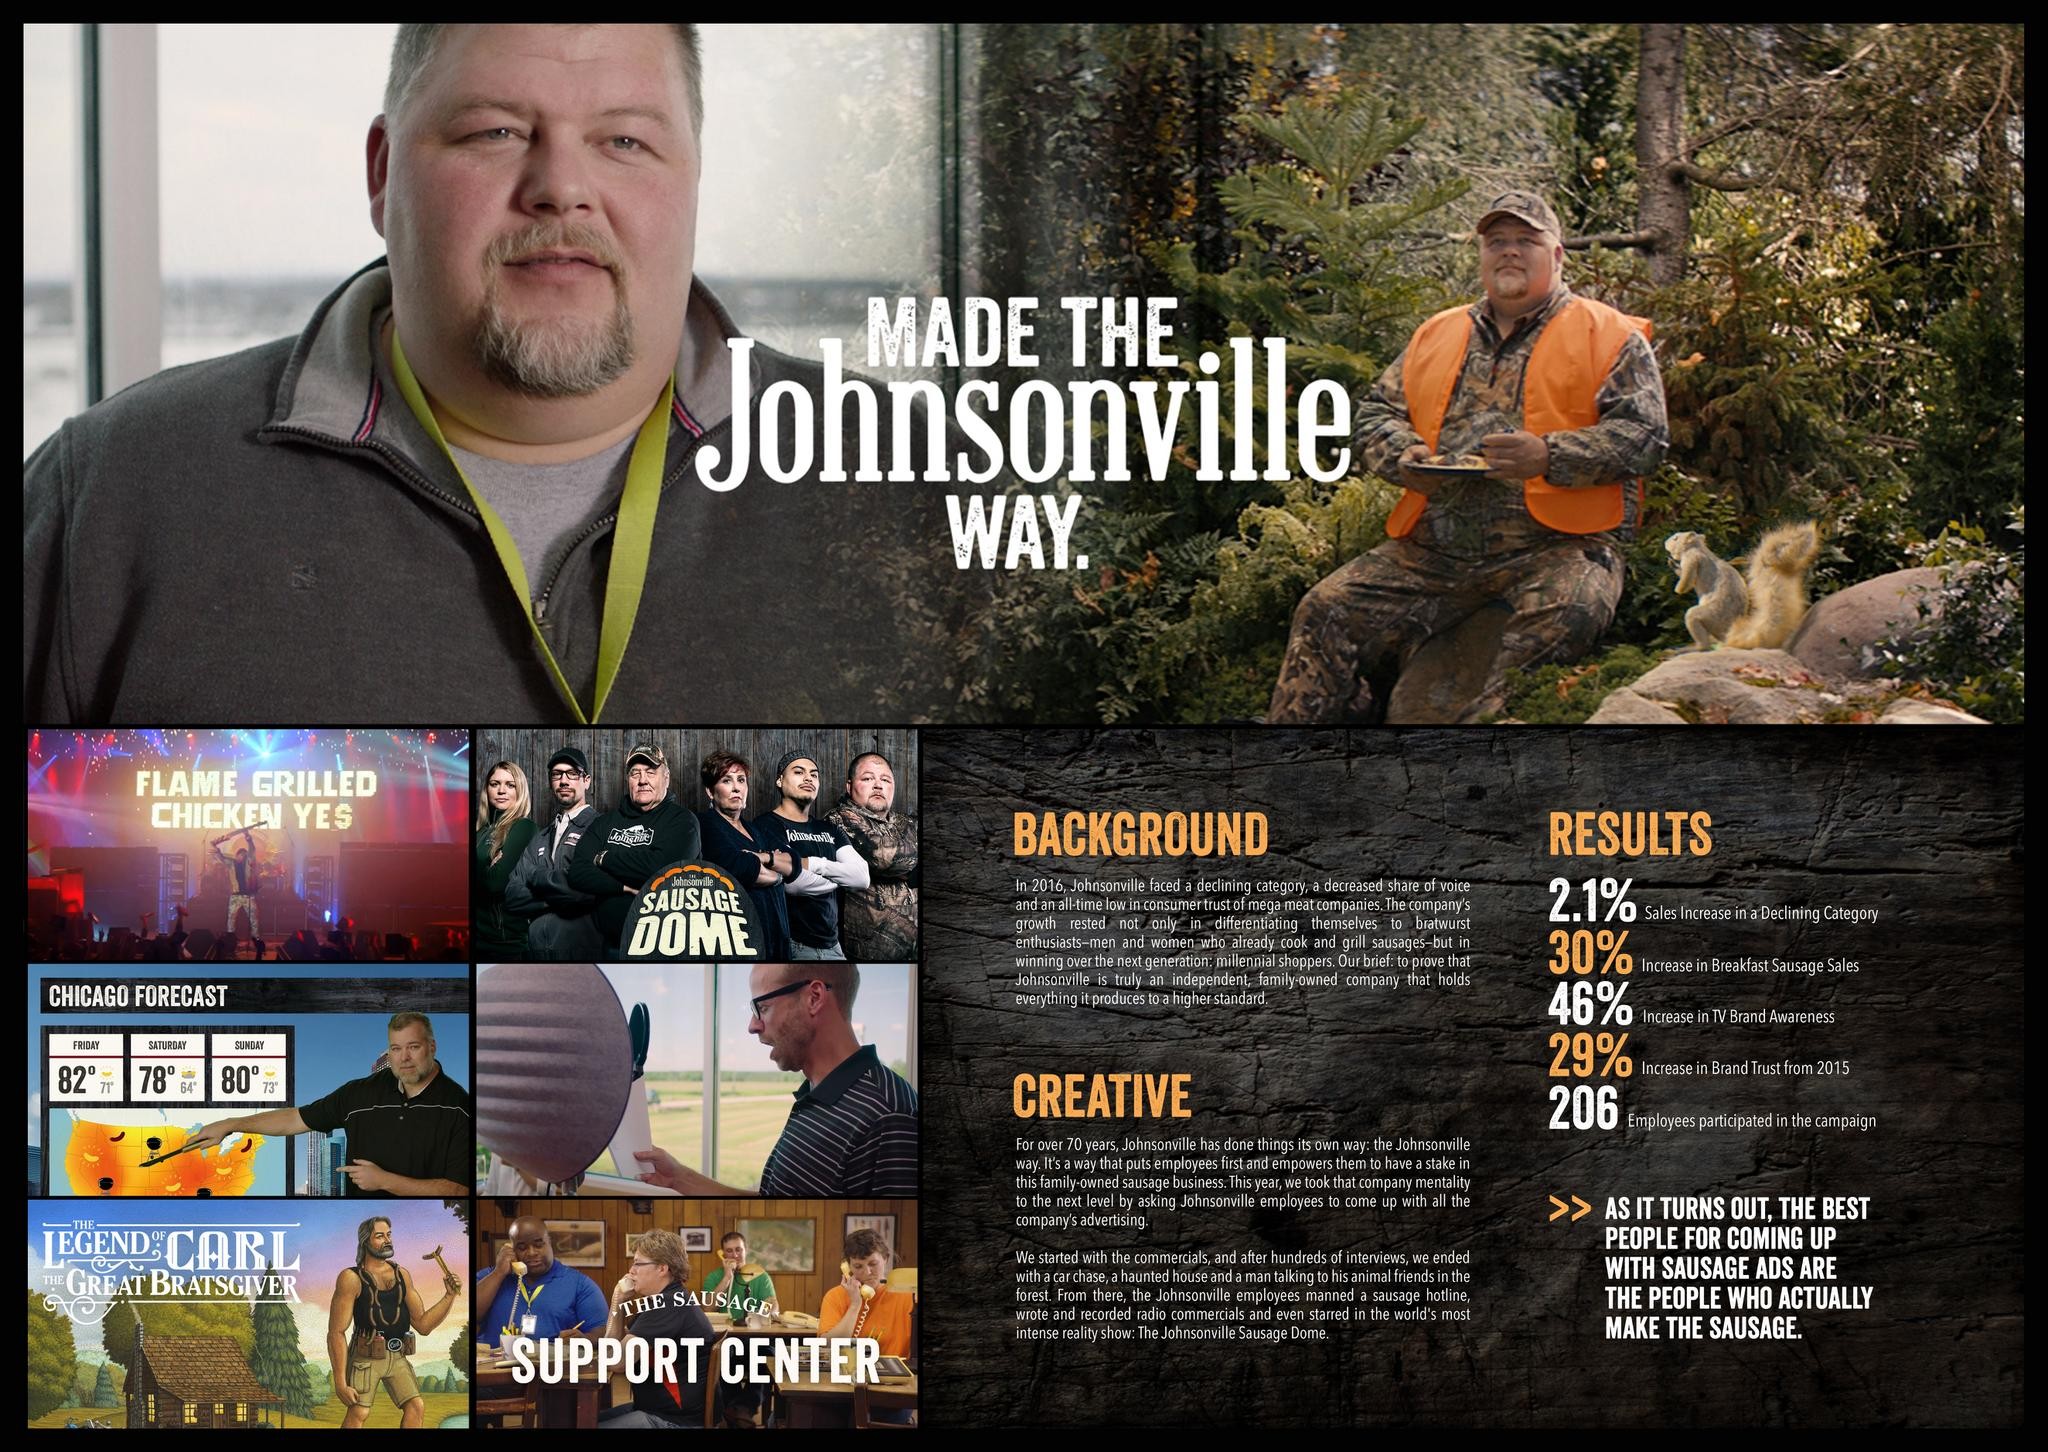 MADE THE JOHNSONVILLE WAY